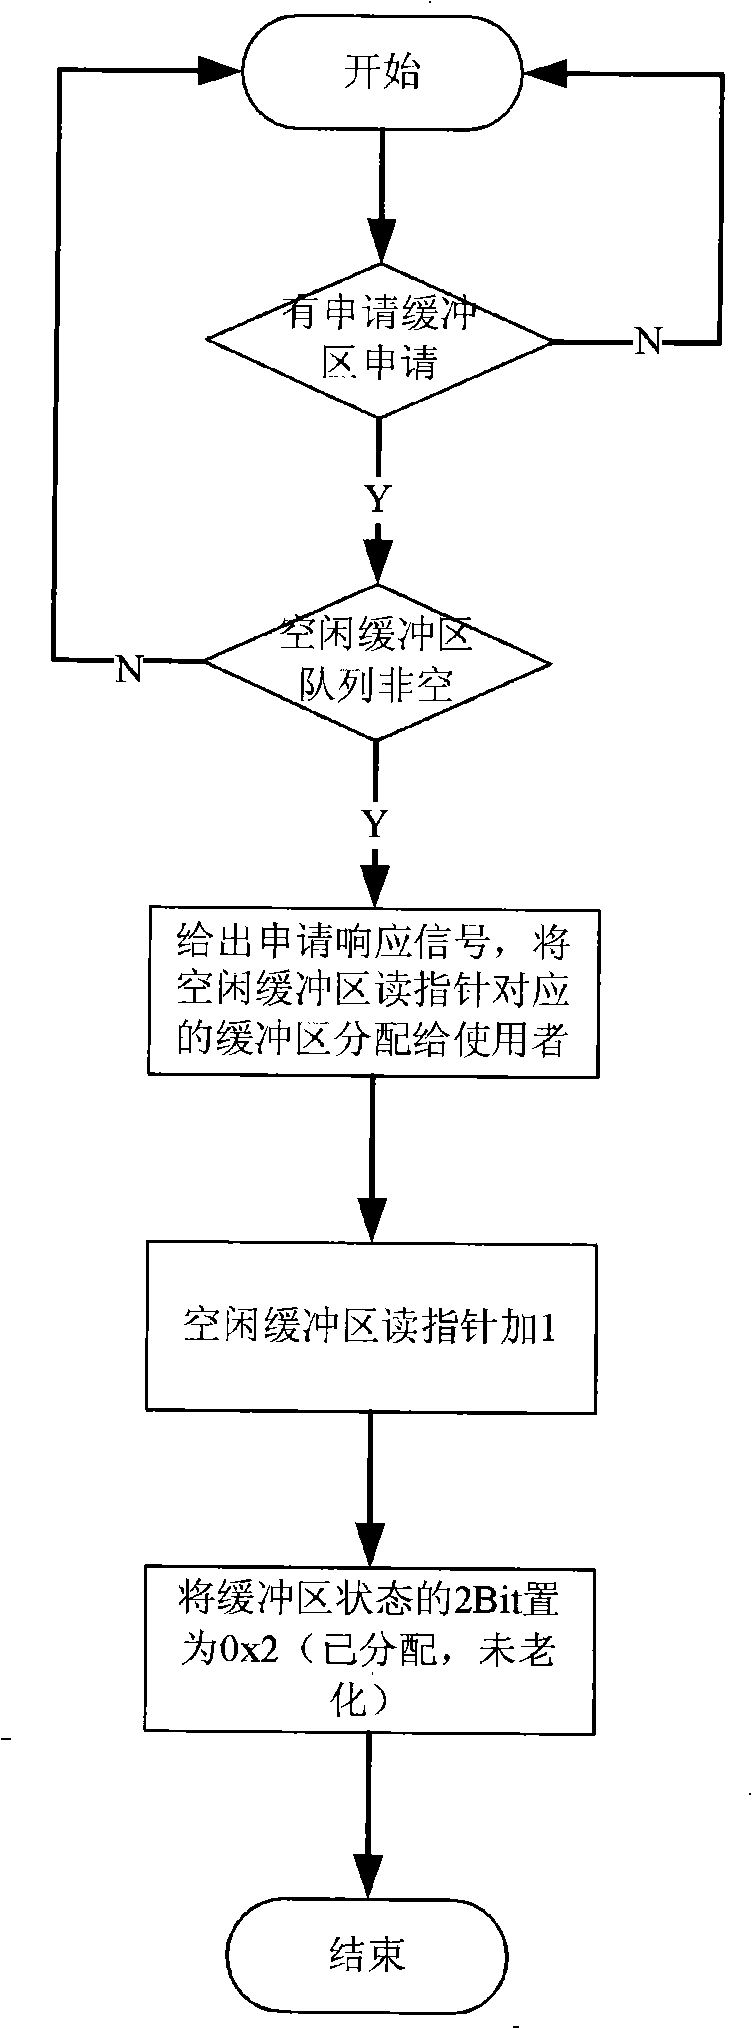 Method and system for managing buffer areas